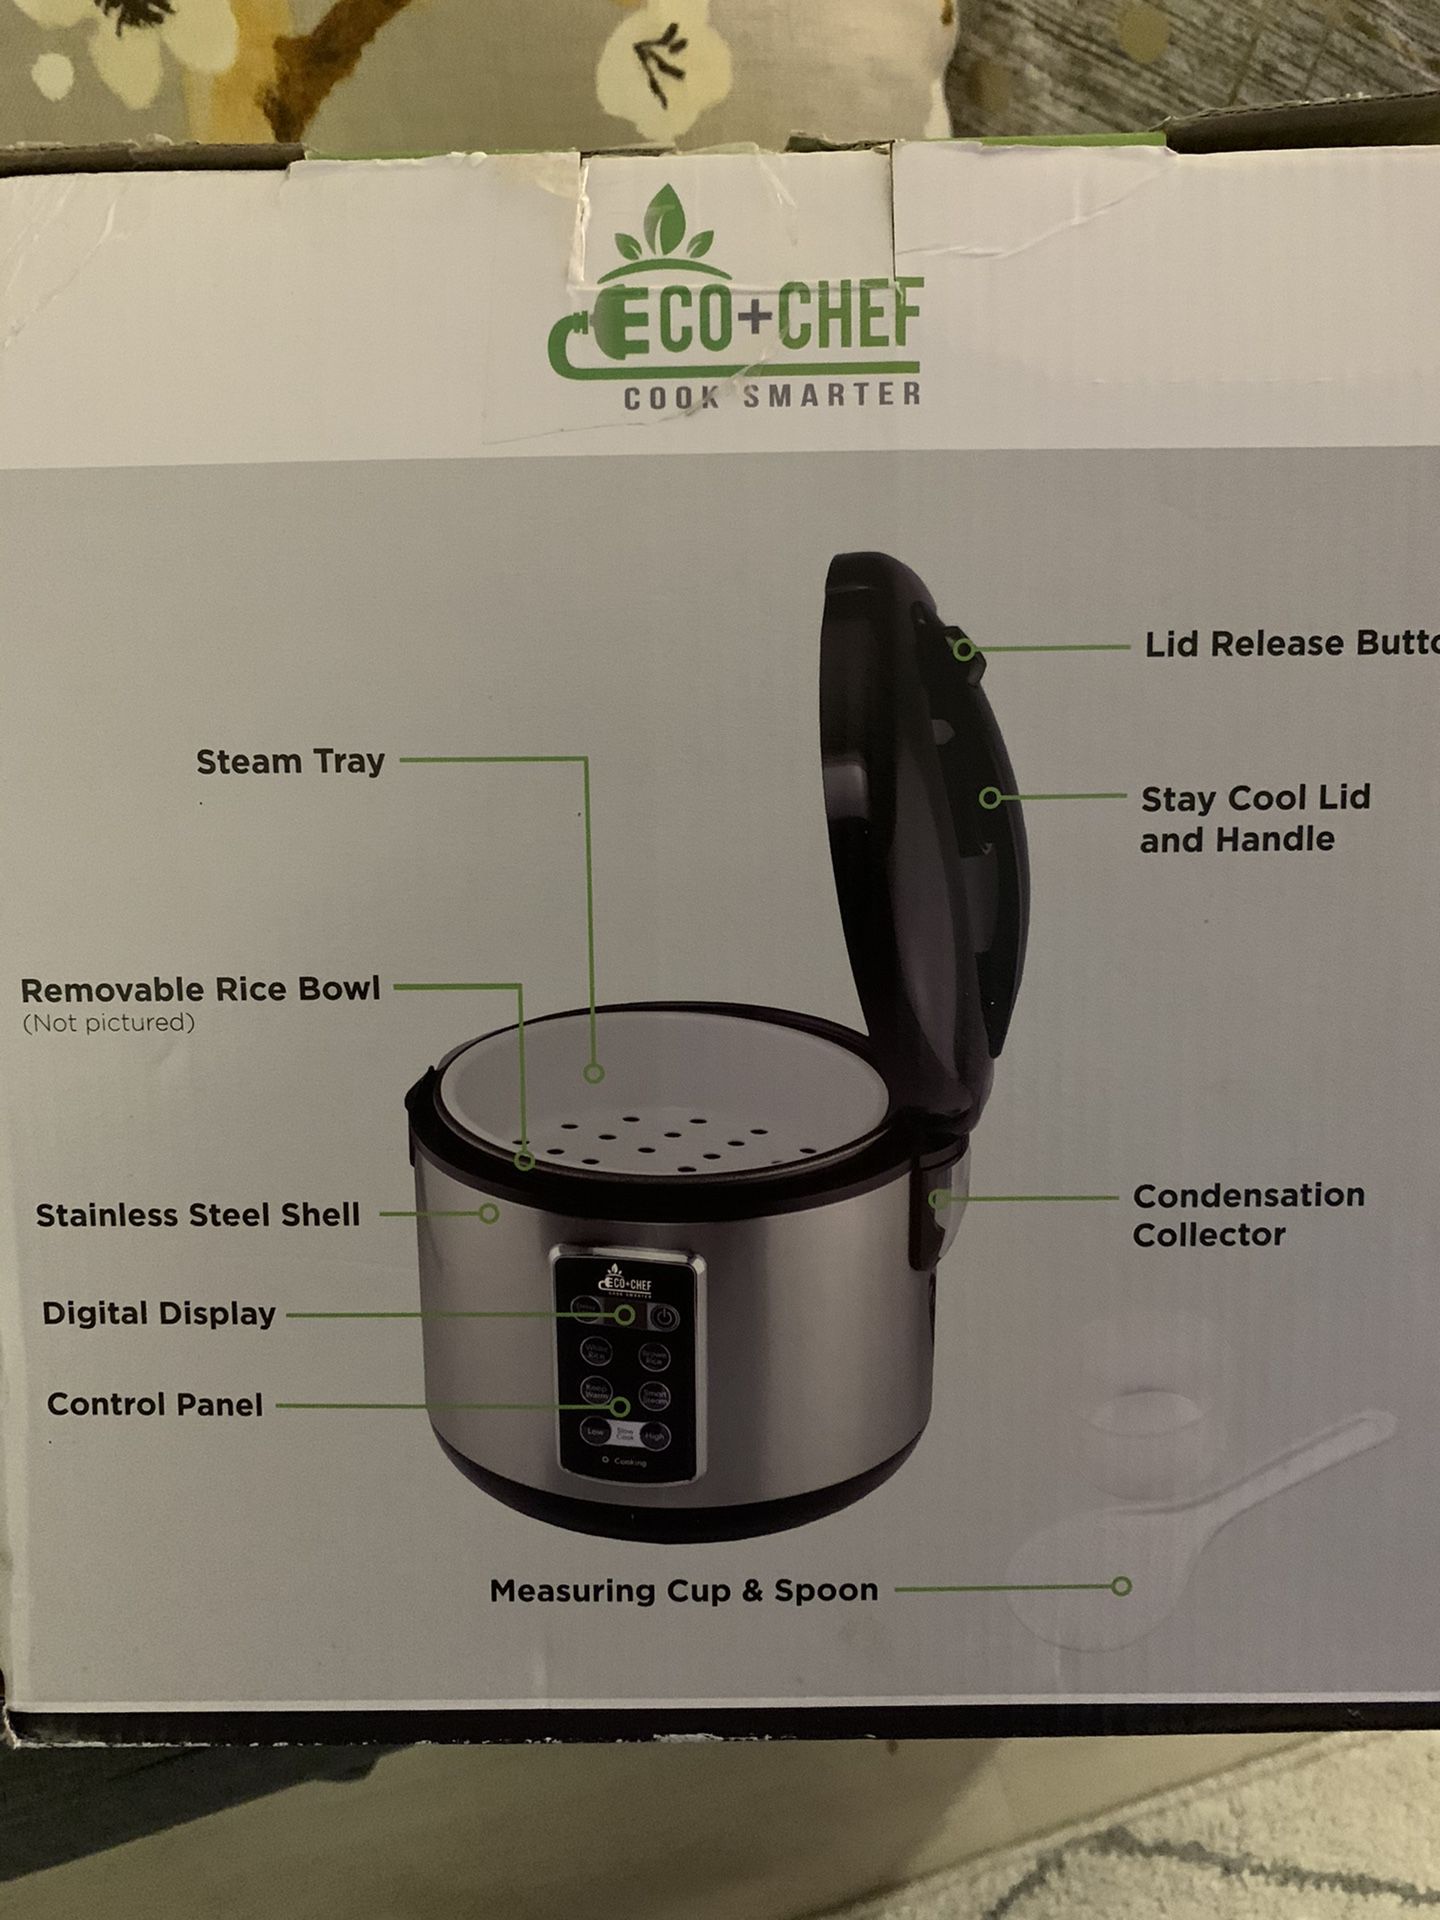 ChefMan Electric Egg Cooker for Sale in Temecula, CA - OfferUp